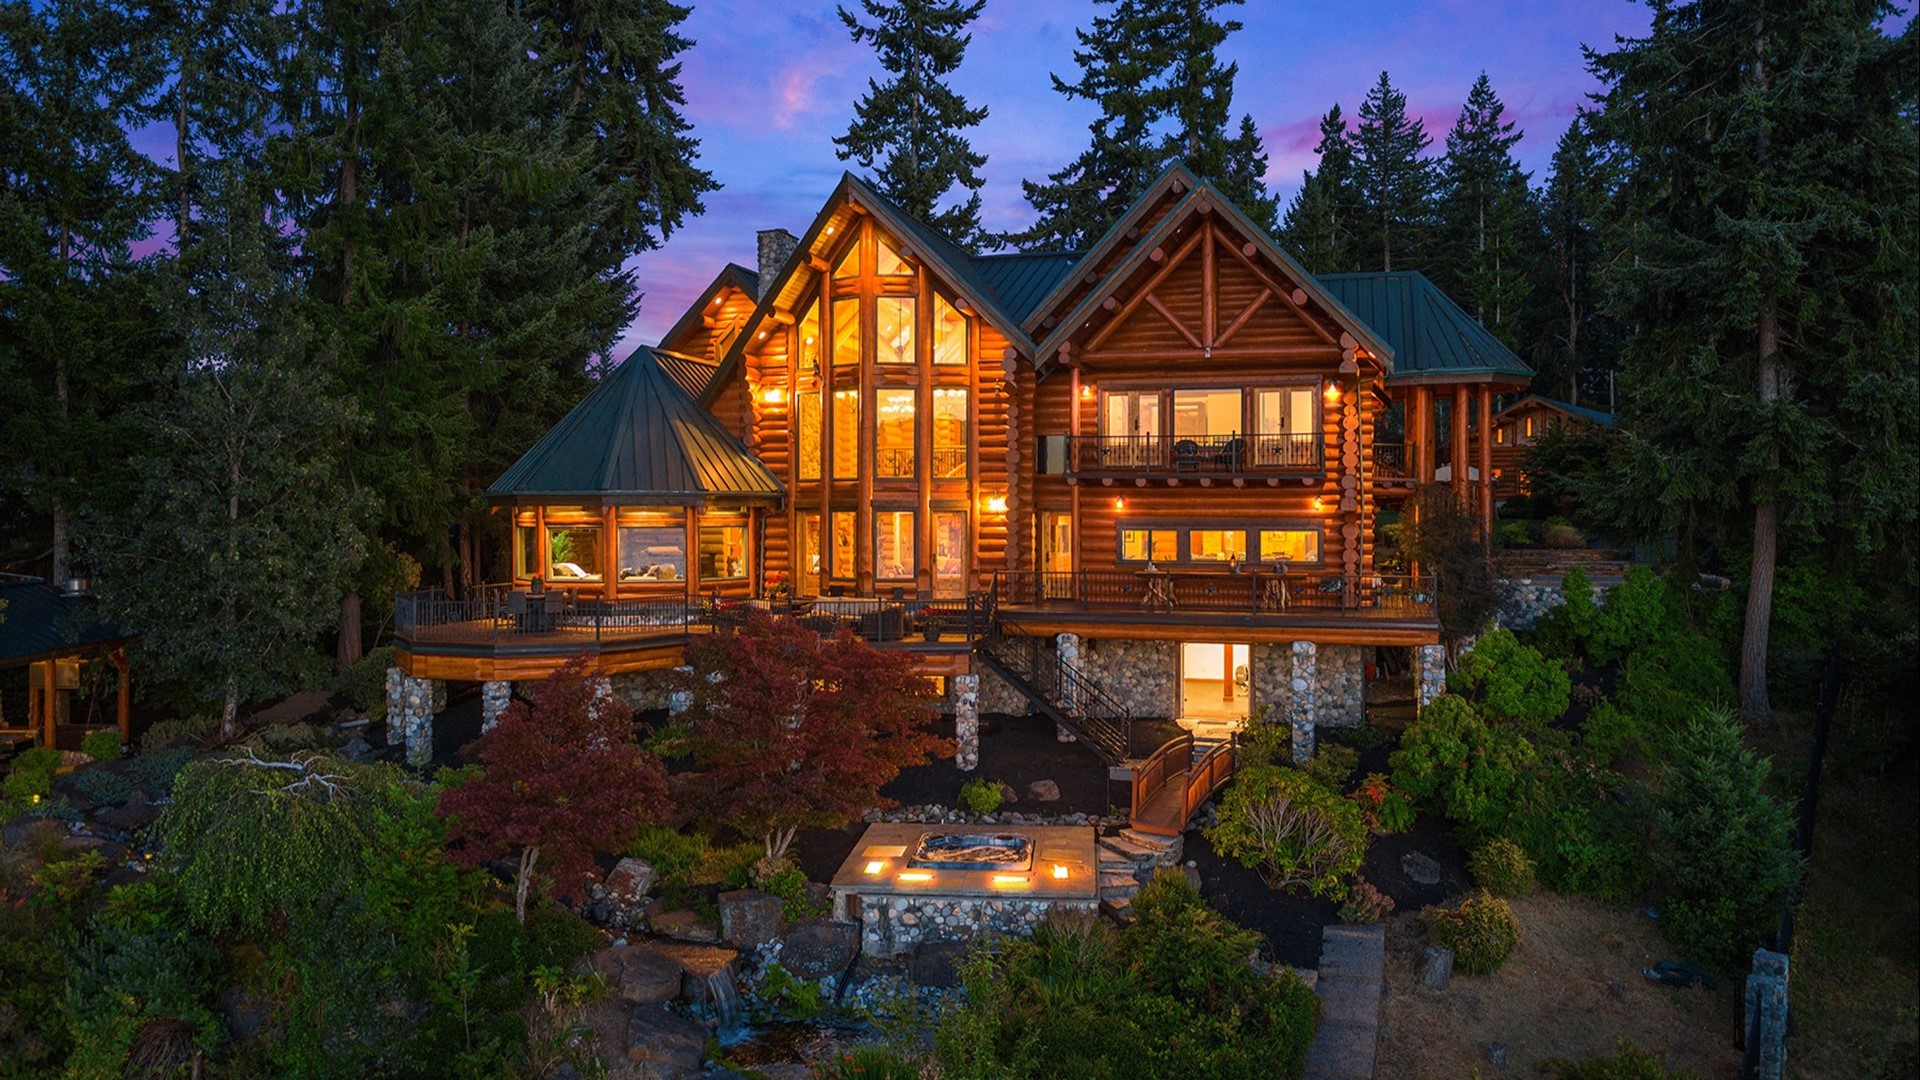 That dream cabin you've always imagined just got super-sized. #k5evening